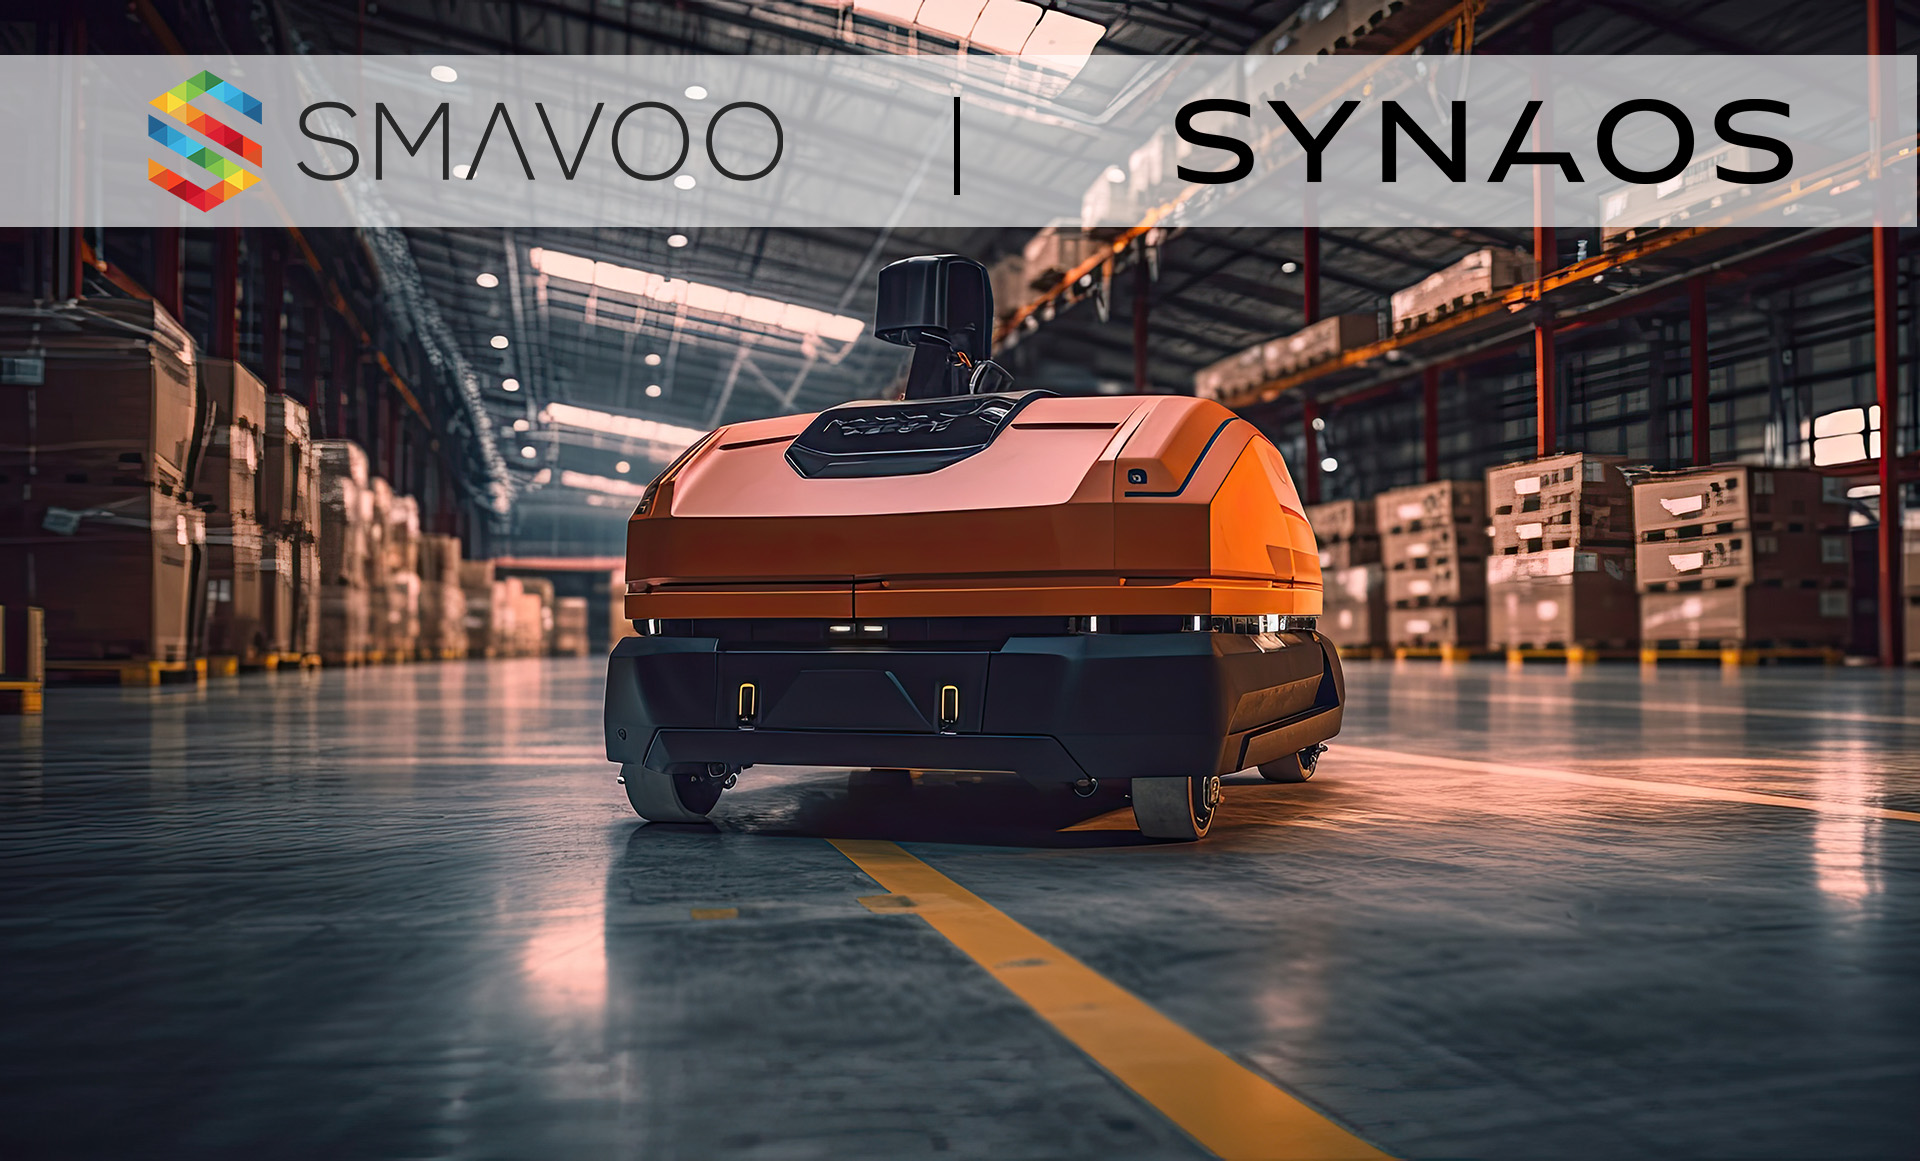 Featured image for “SMAVOO & SYNAOS Partnership”